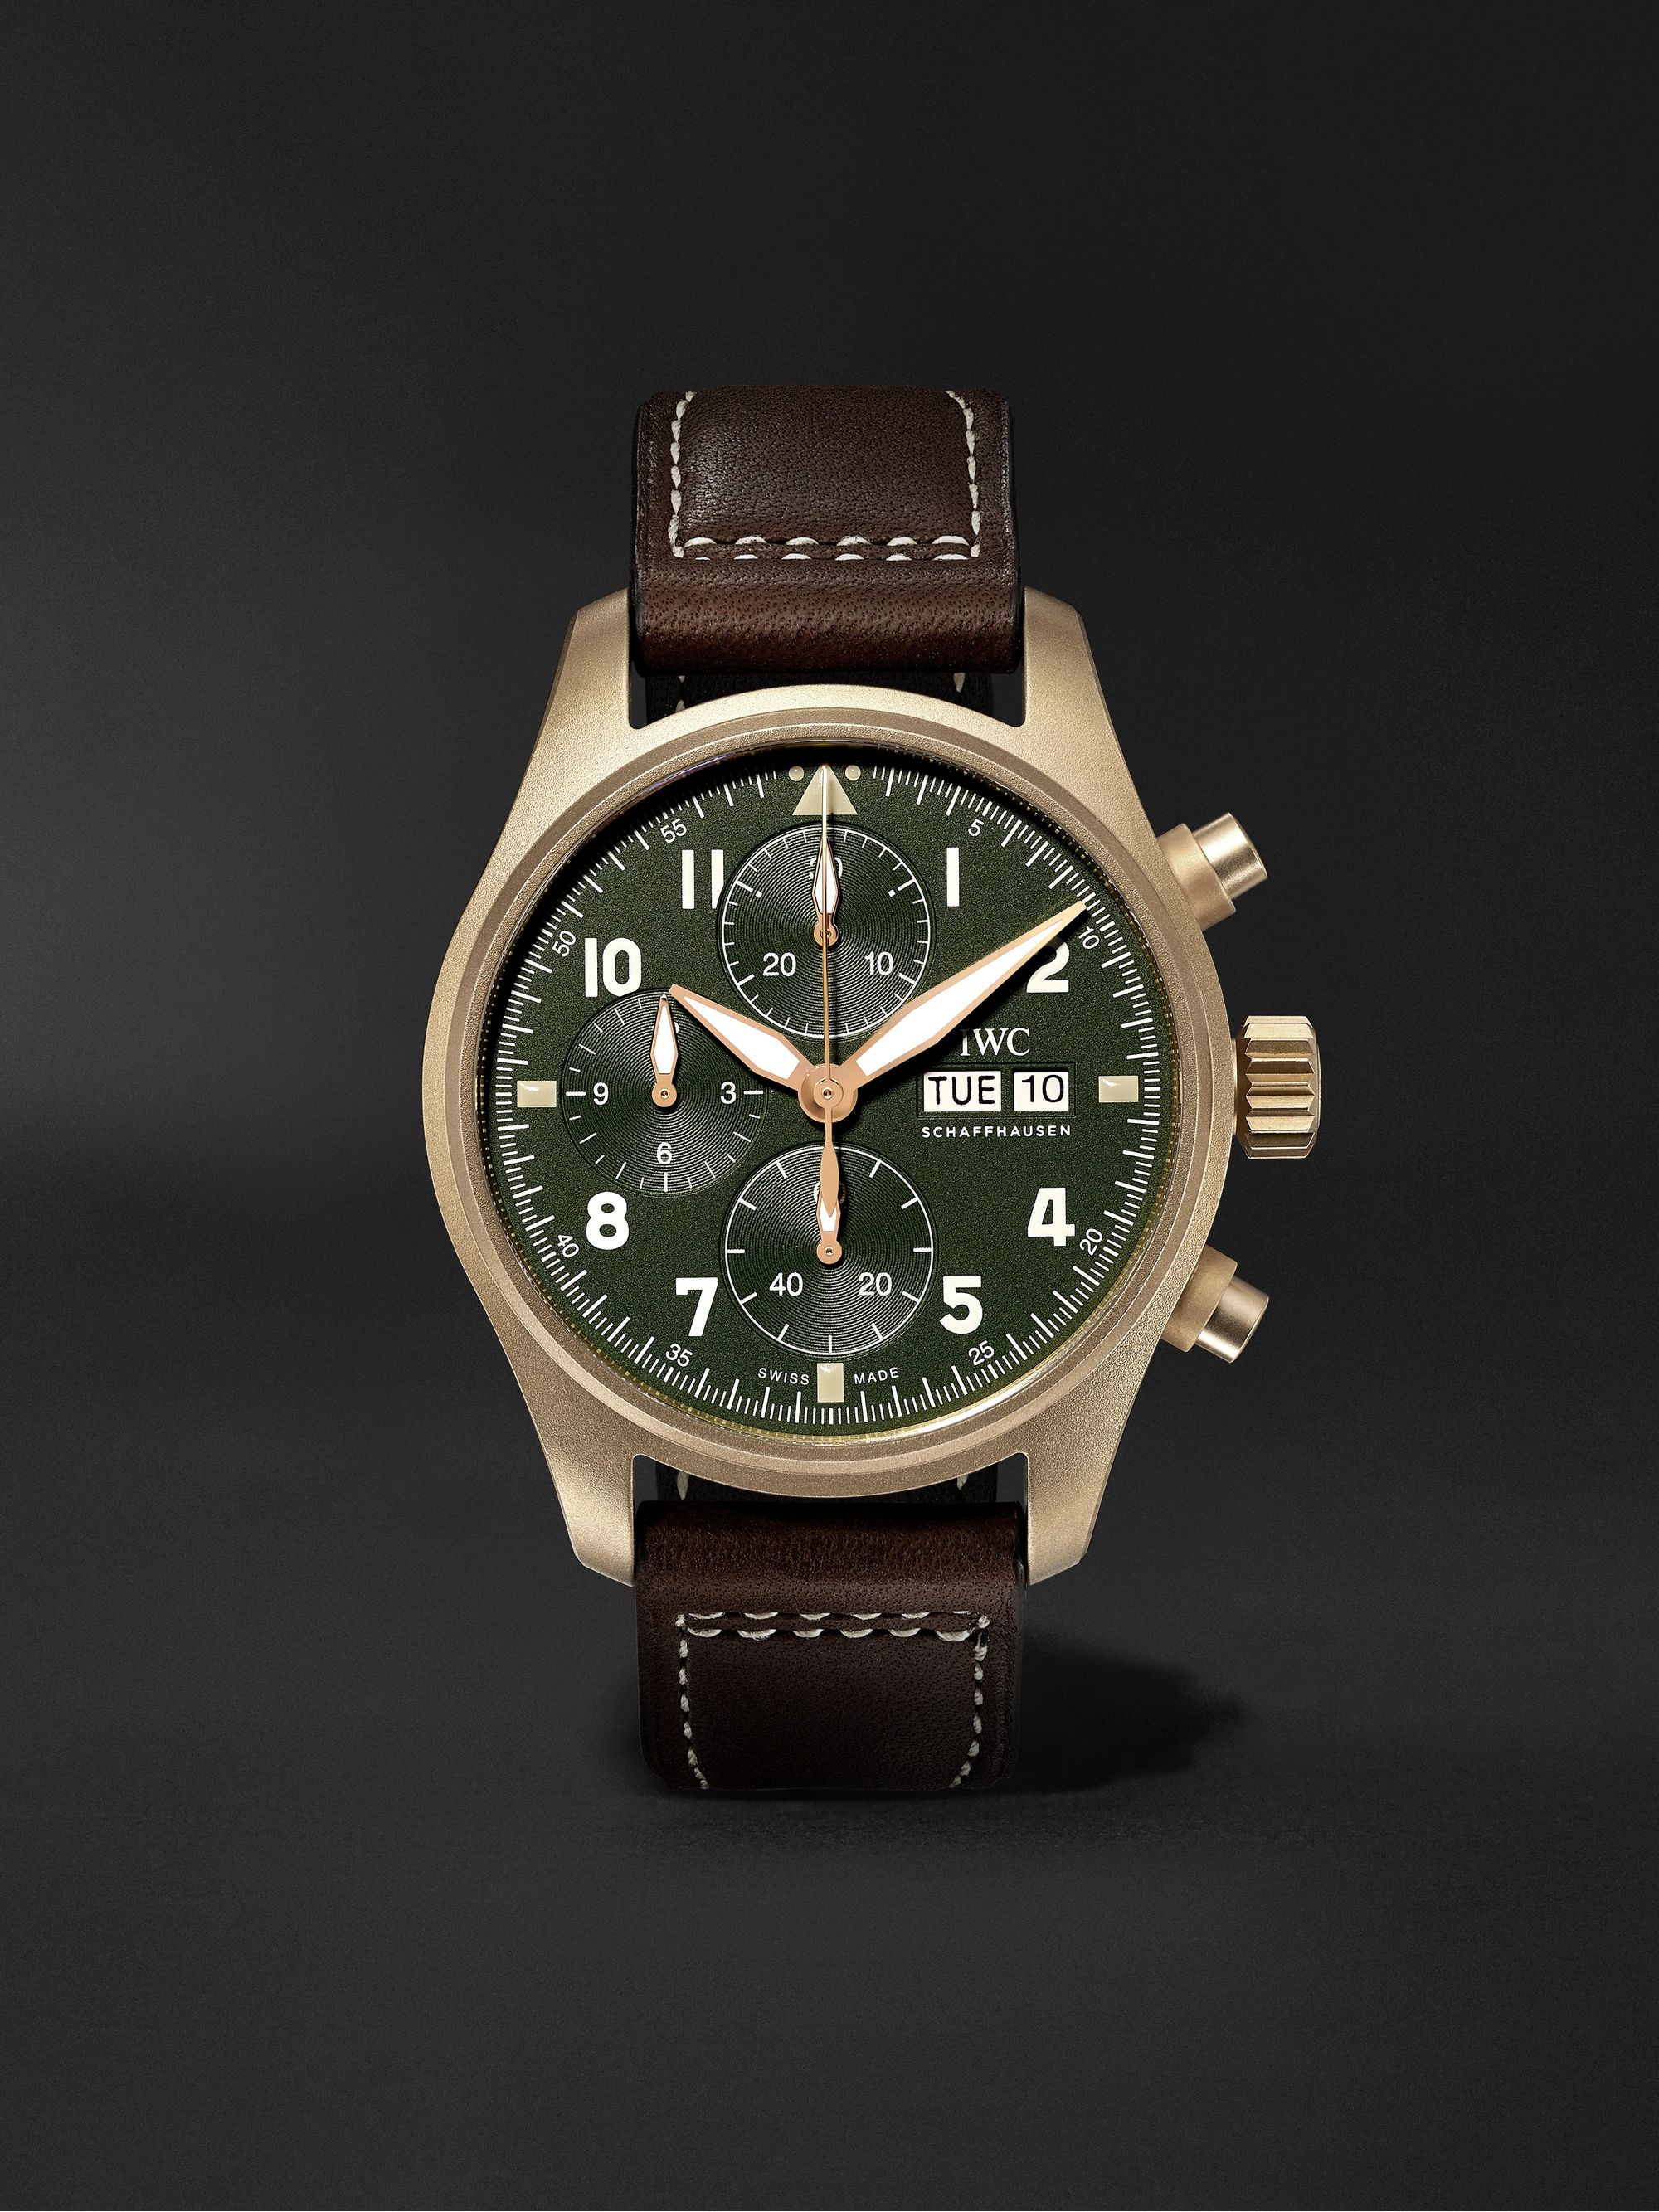 IWC SCHAFFHAUSEN Pilot's Spitfire Automatic Chronograph 41mm Bronze and Leather Watch, Ref. No. IW387902